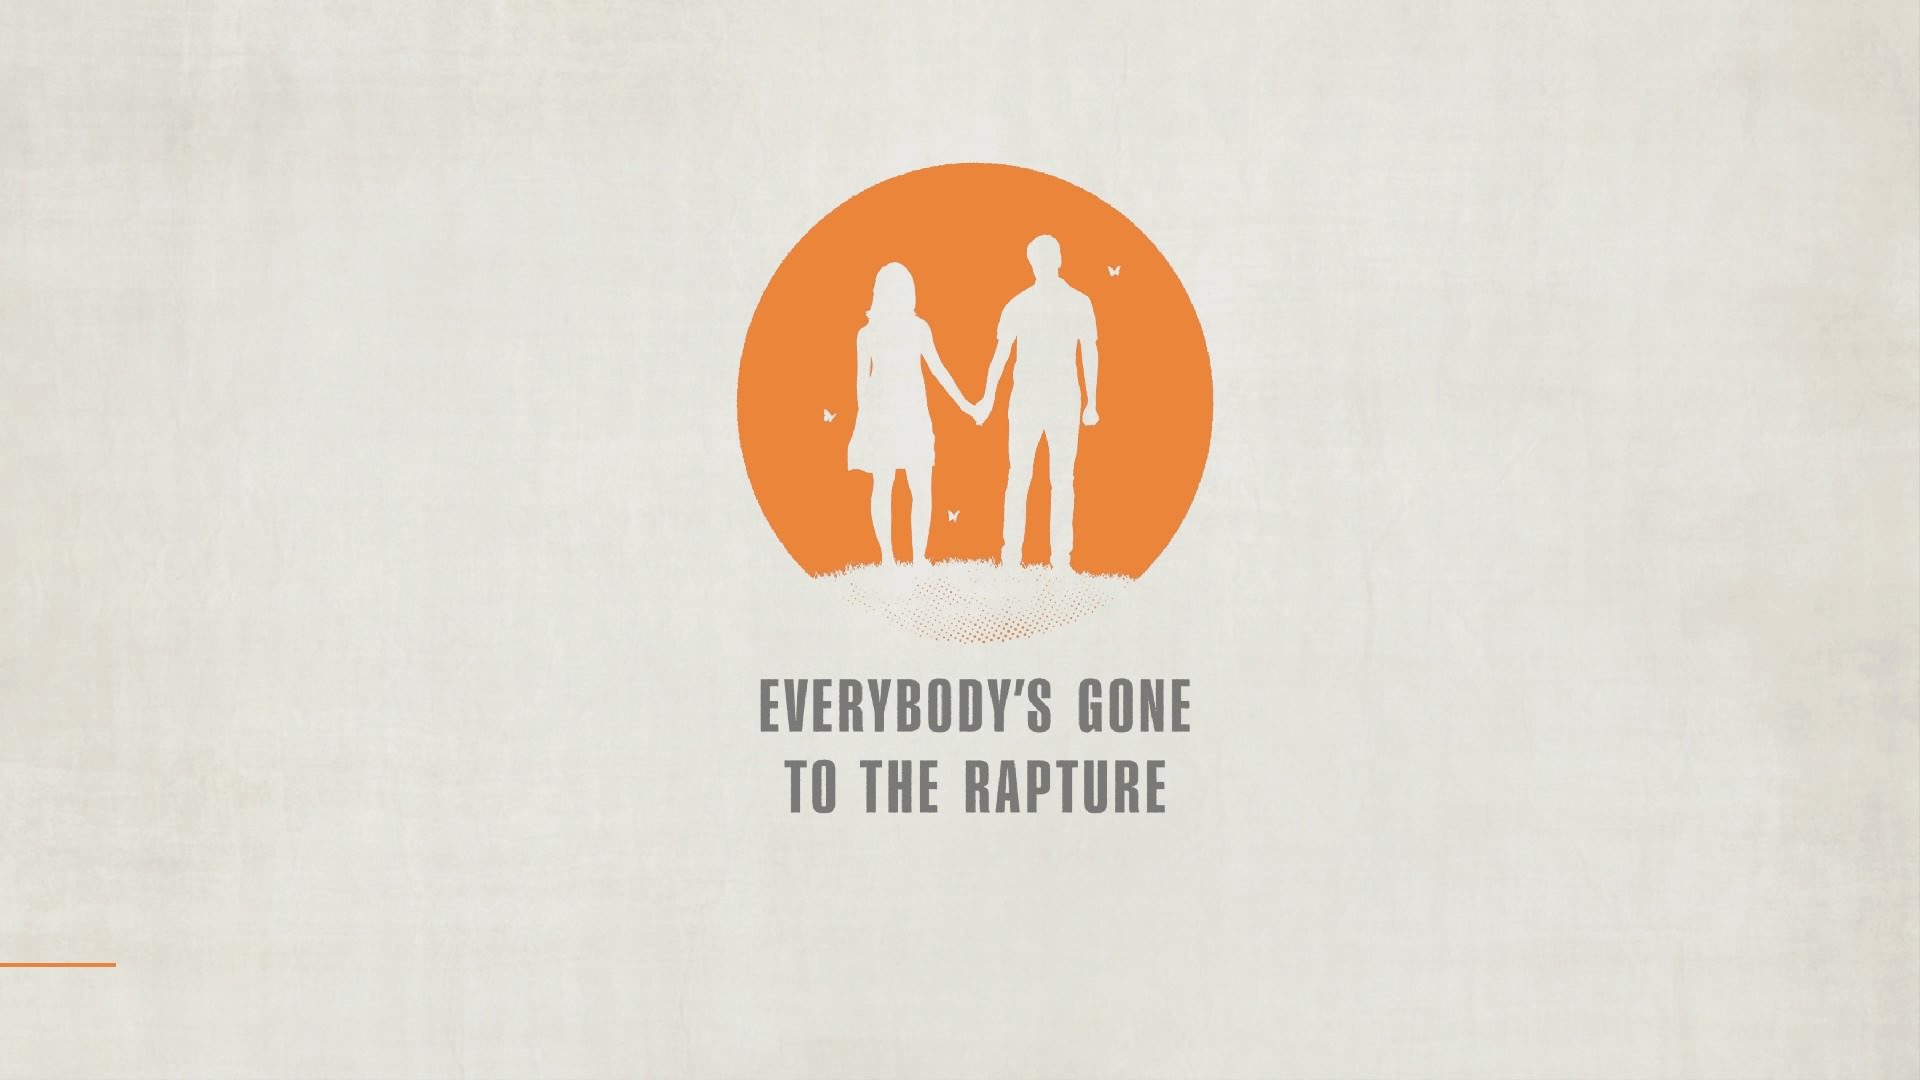 Everybody was to the world. Everybody’s gone to the Rapture. Everybody's gone to the Rapture (2015). Everybody's gone to the Rapture логотип. Everybody going to the Rapture.